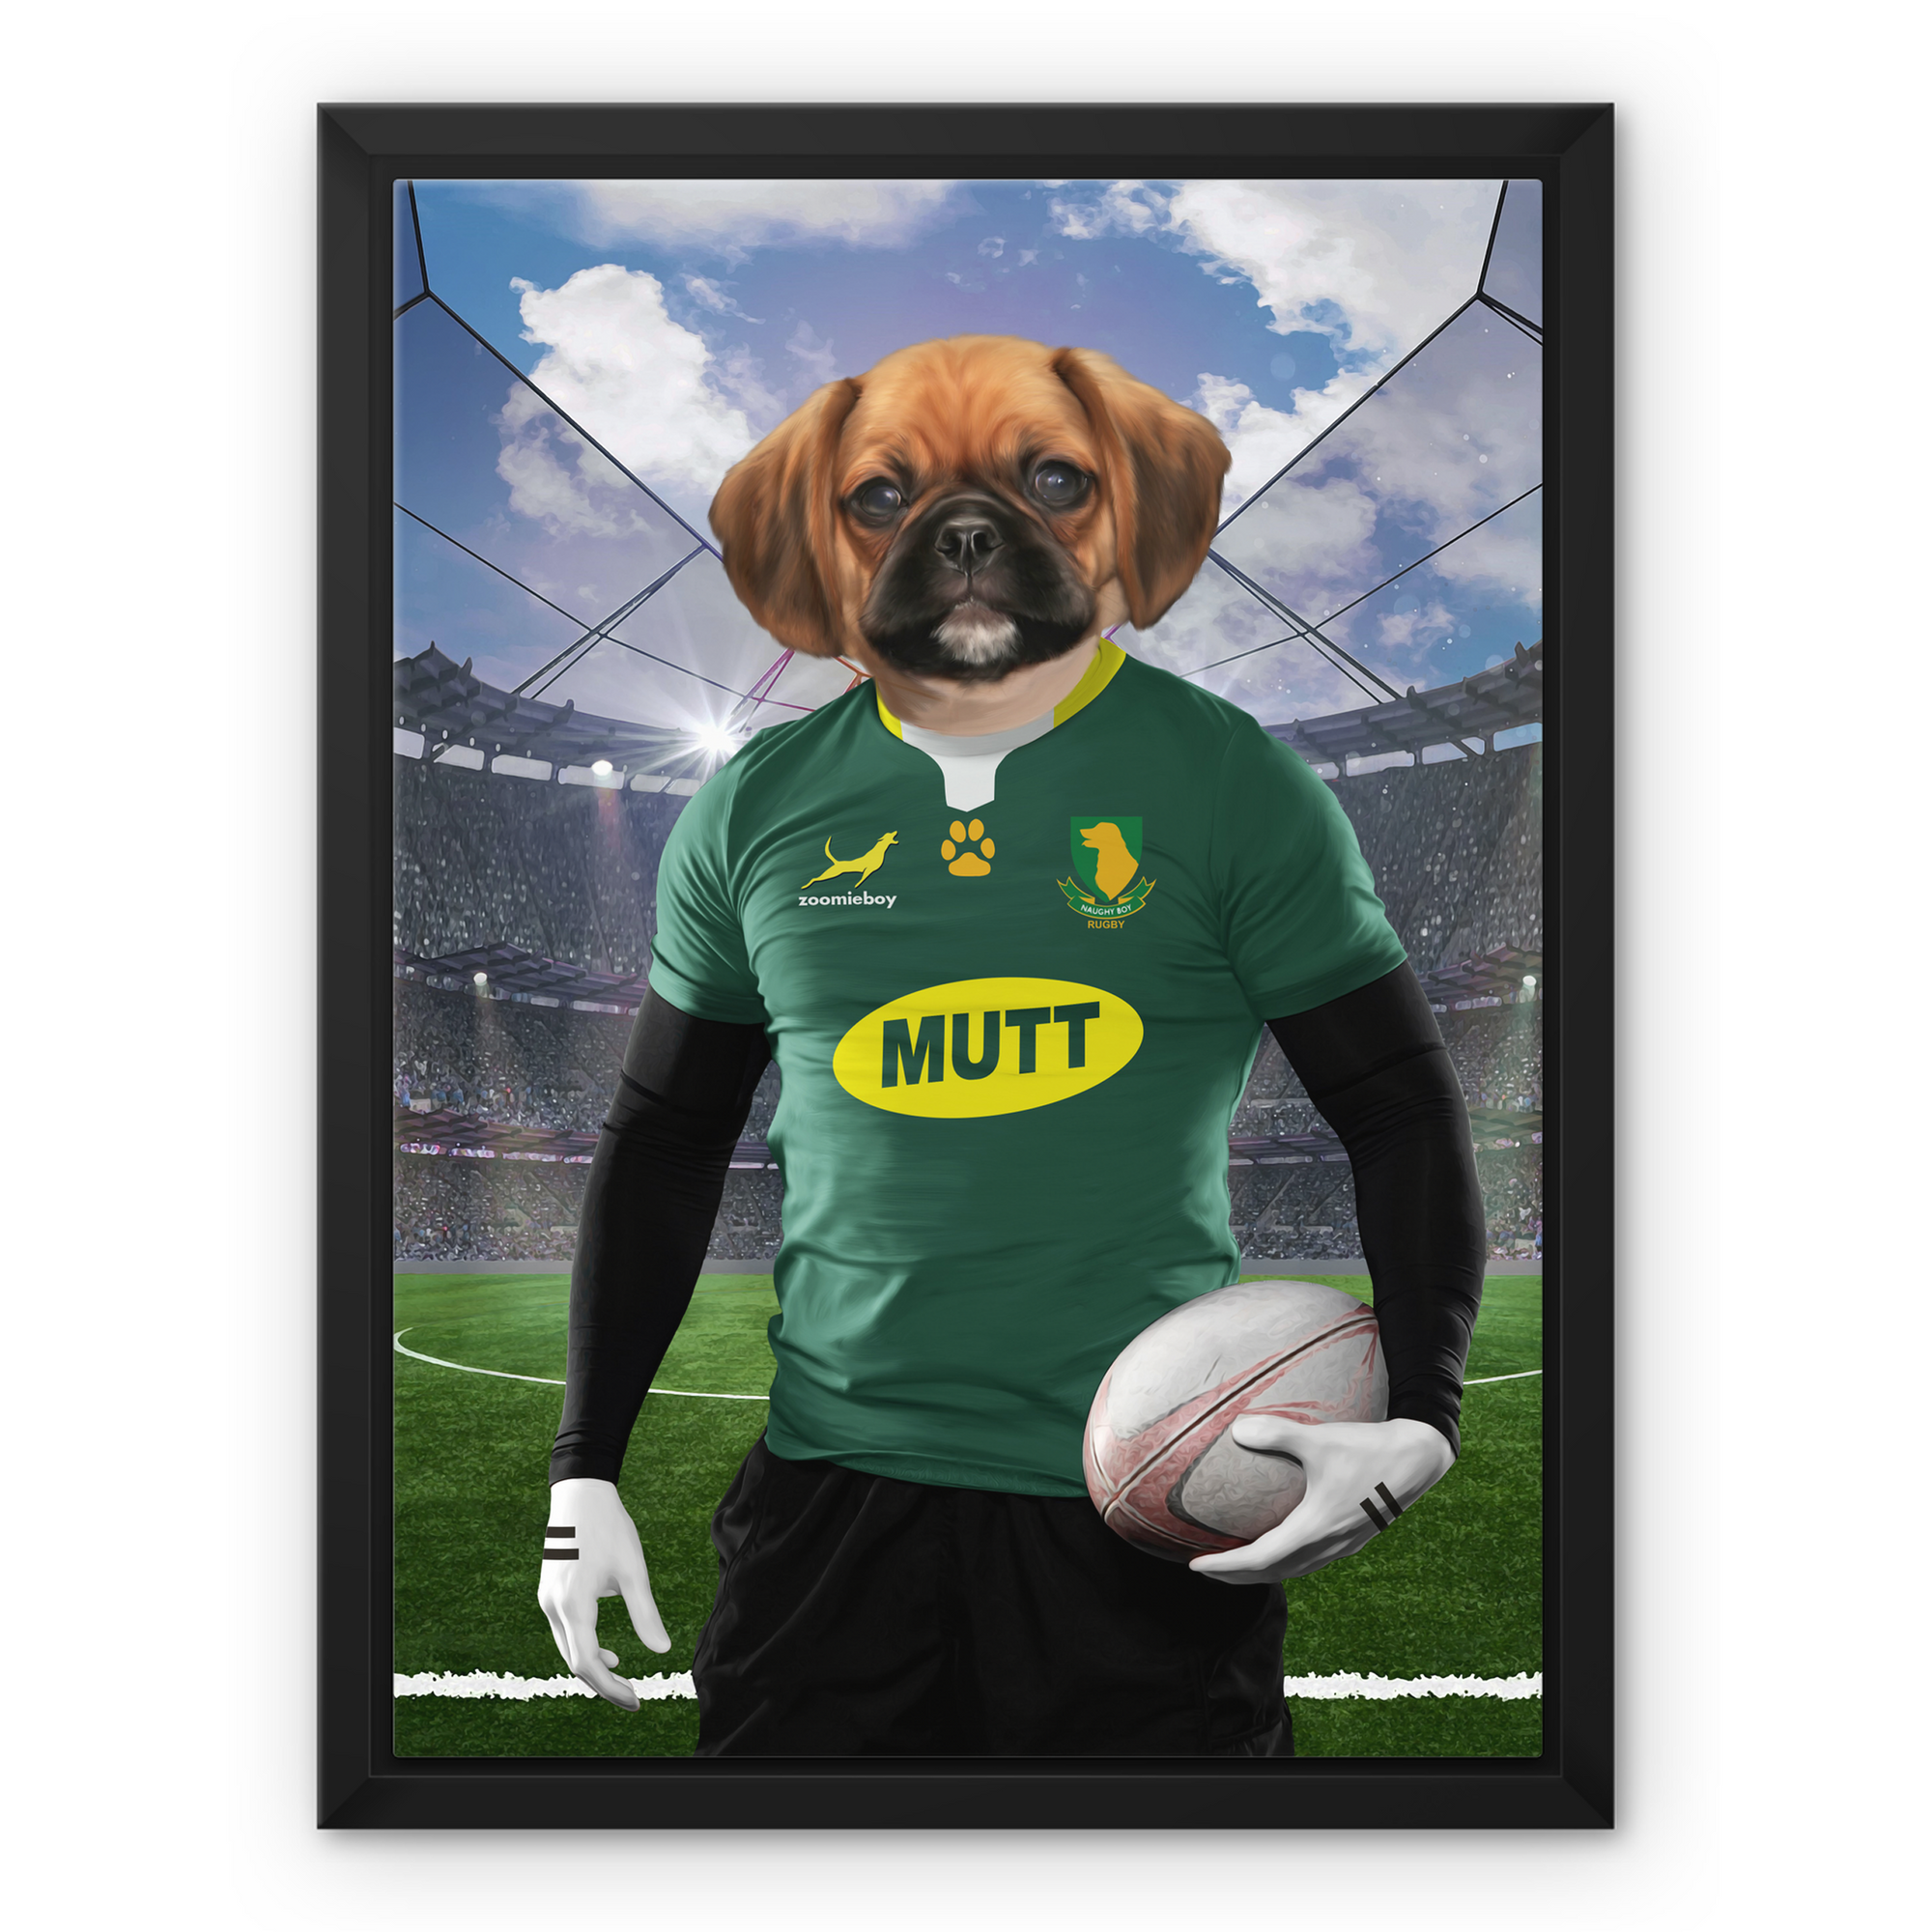 South Africa Rugby Team: Paw & Glory, pawandglory, custom pet painting, dog canvas art, paintings of pets from photos, custom dog painting, pet portraits, funny dog paintings, small dog portrait